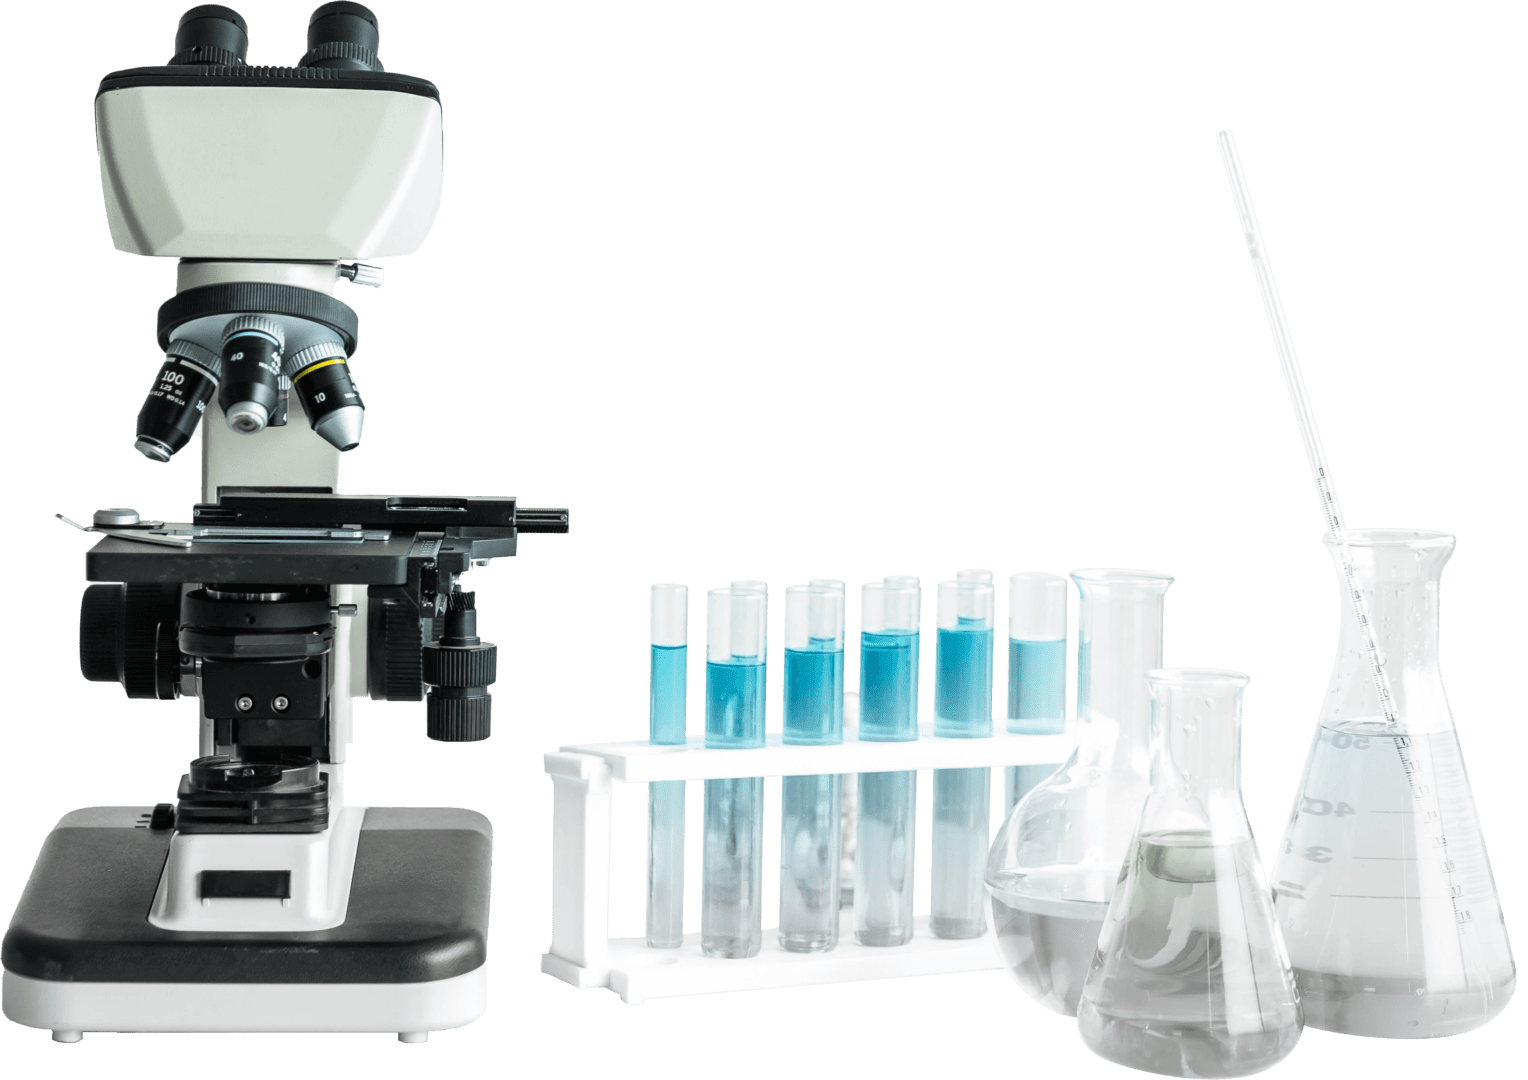 A microscope and several bottles of blue liquid.